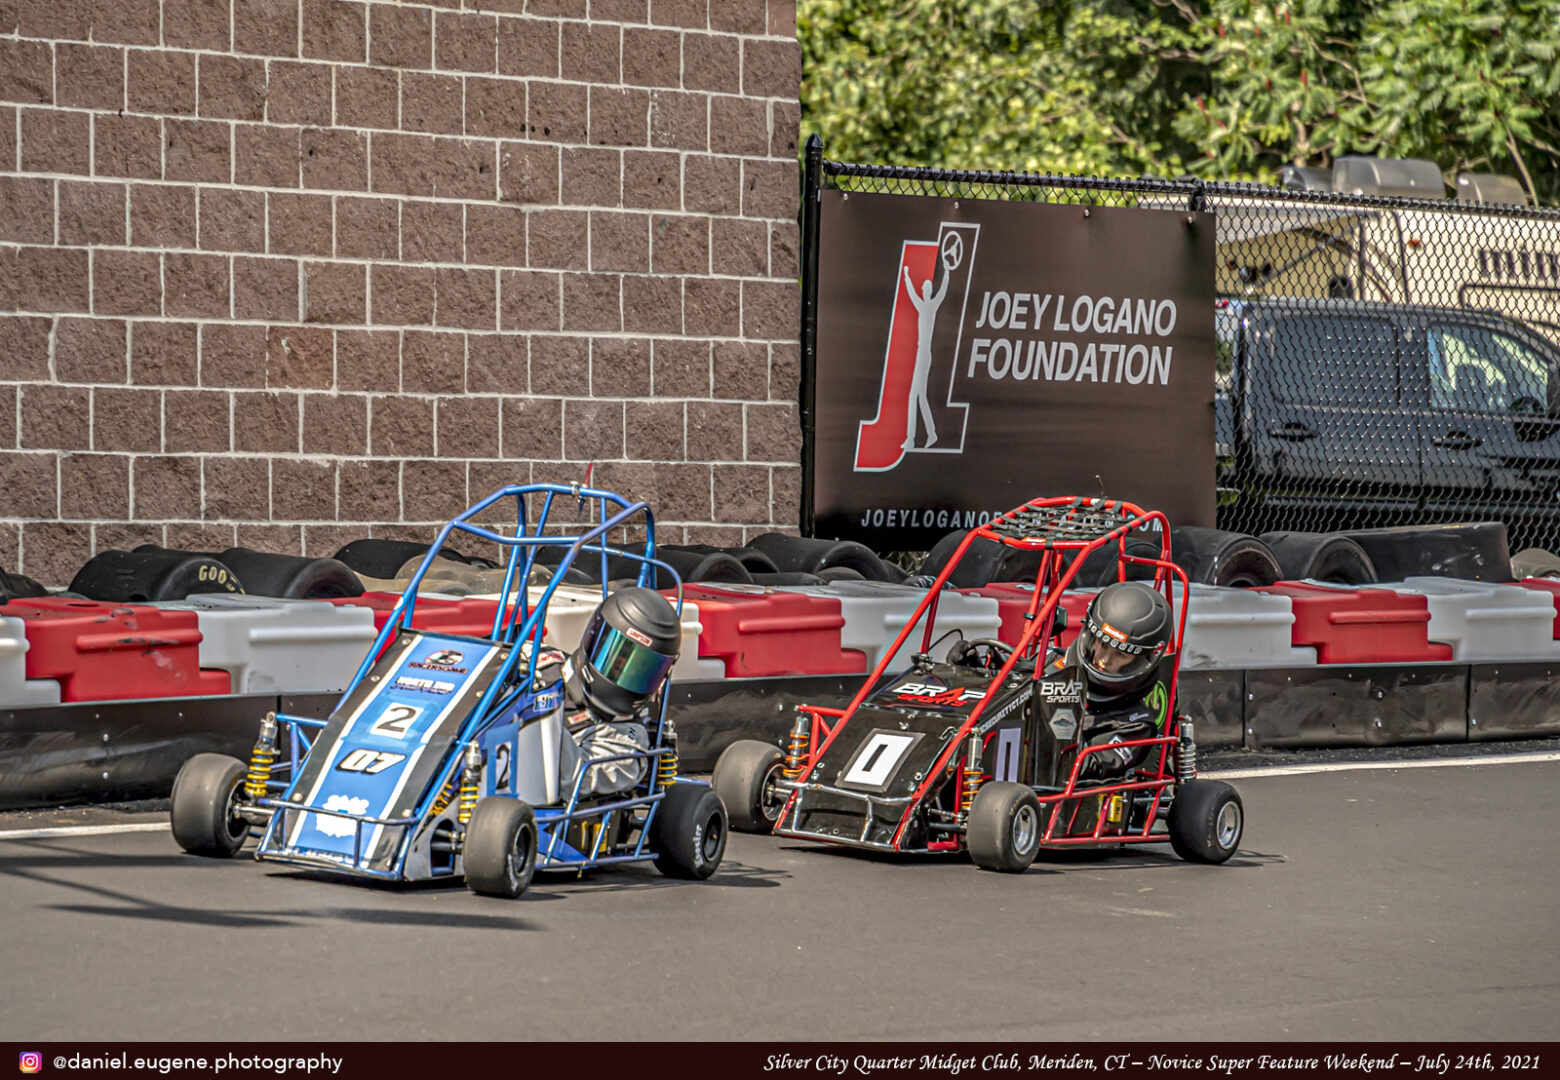 Two Go Karting Vehicles in Blue and Red Color